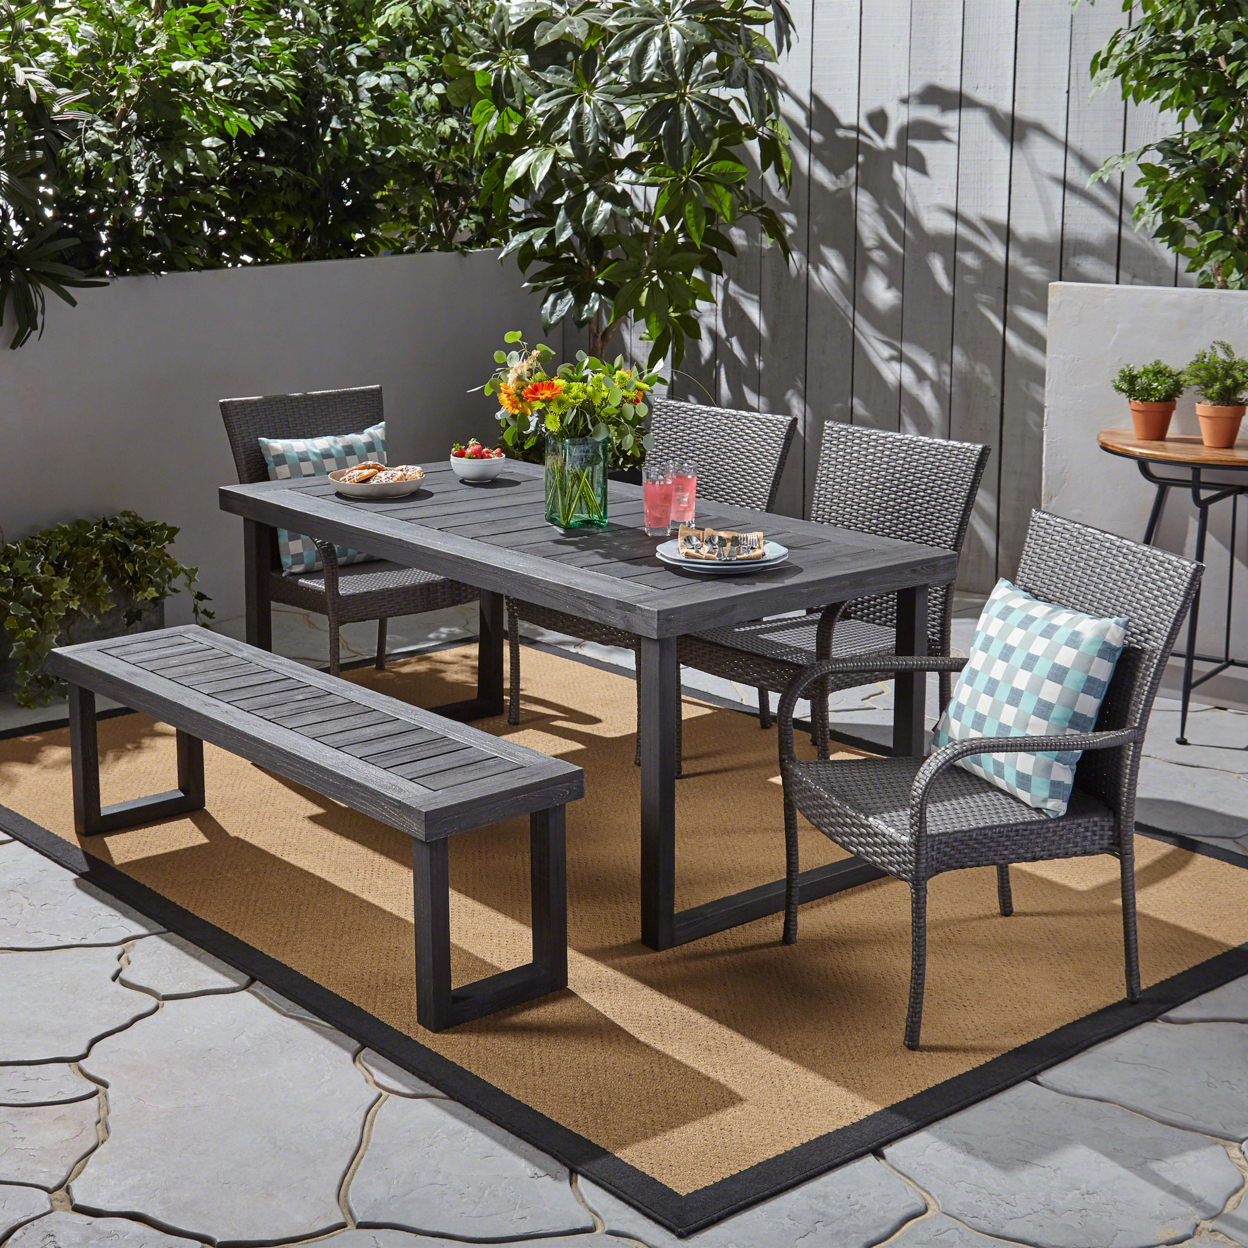 Alfven Outdoor 6-Seater Aluminum Dining Set With Wicker Chairs And Bench - Sandblast Dark Grey + Gray